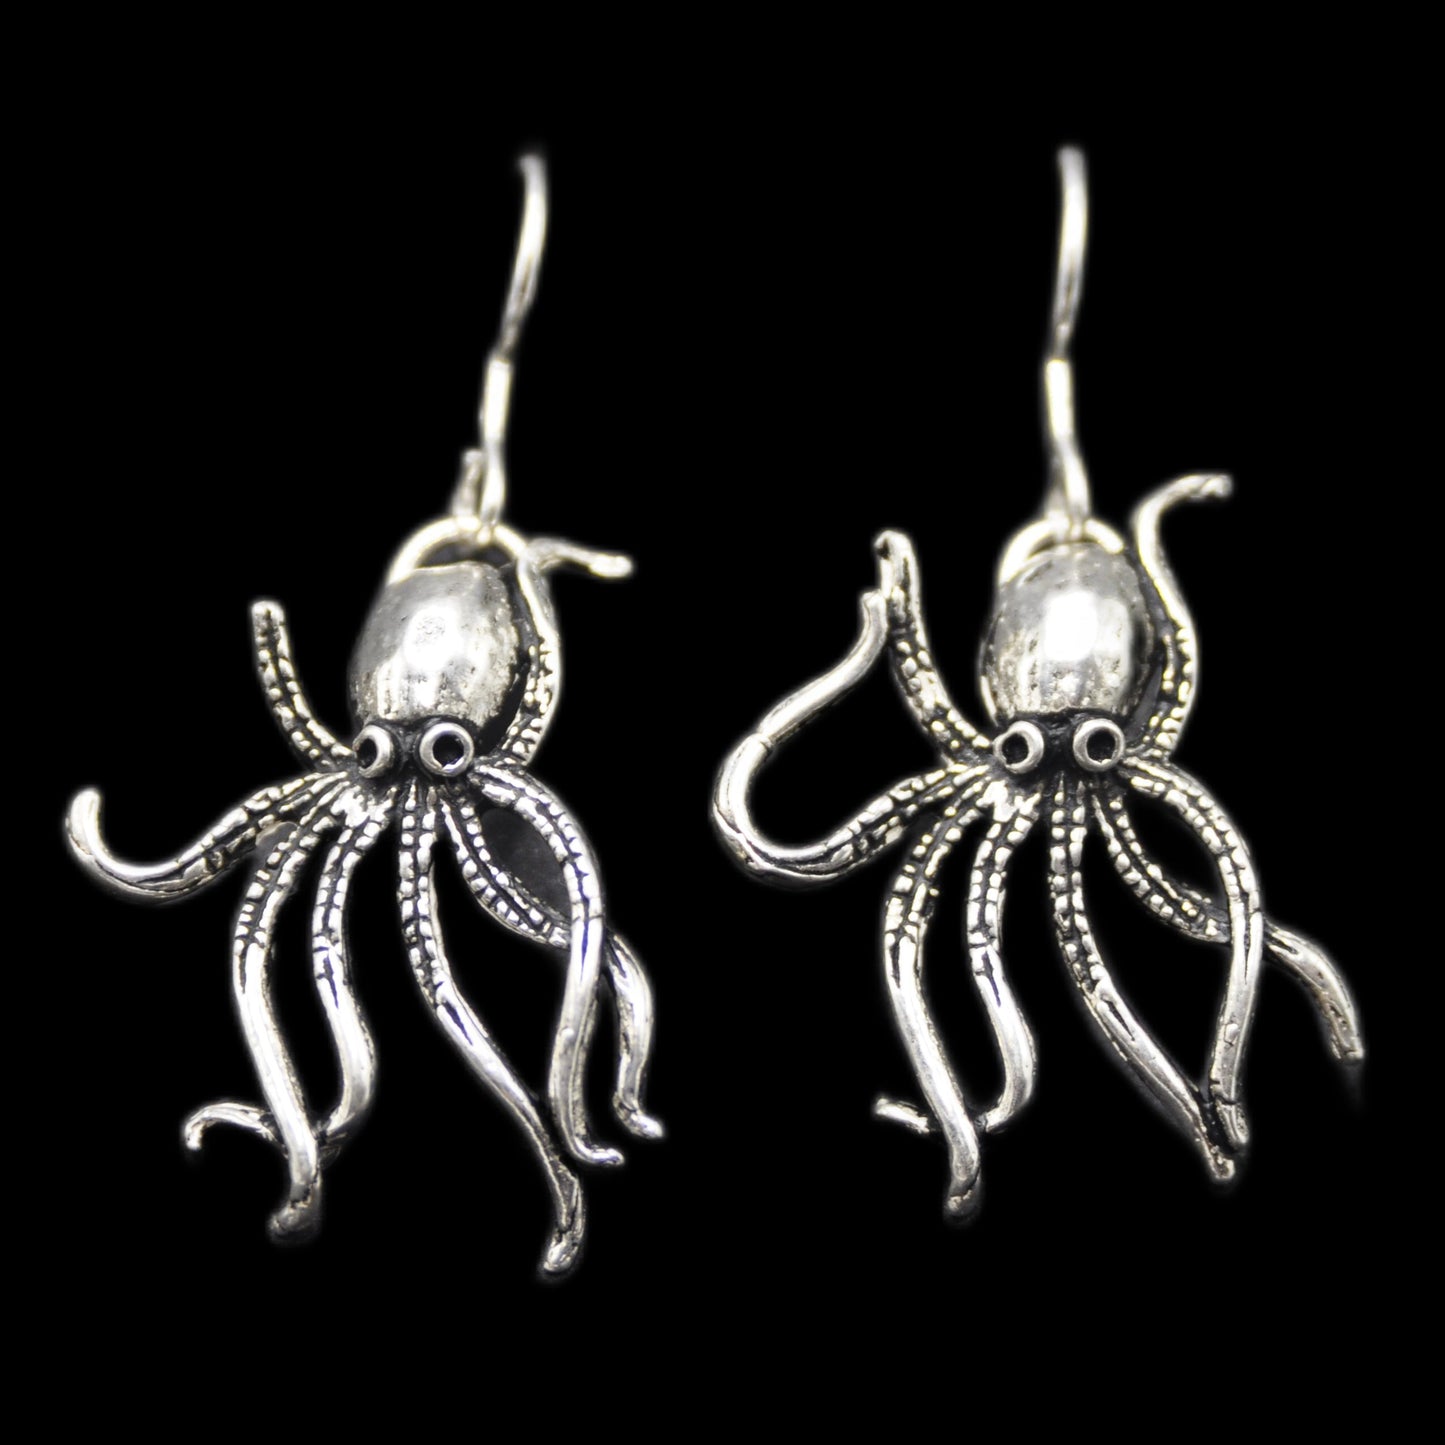 Octopus Earrings, intricately designed Handcrafted Silver Jewelry with Sea Creature Motif.